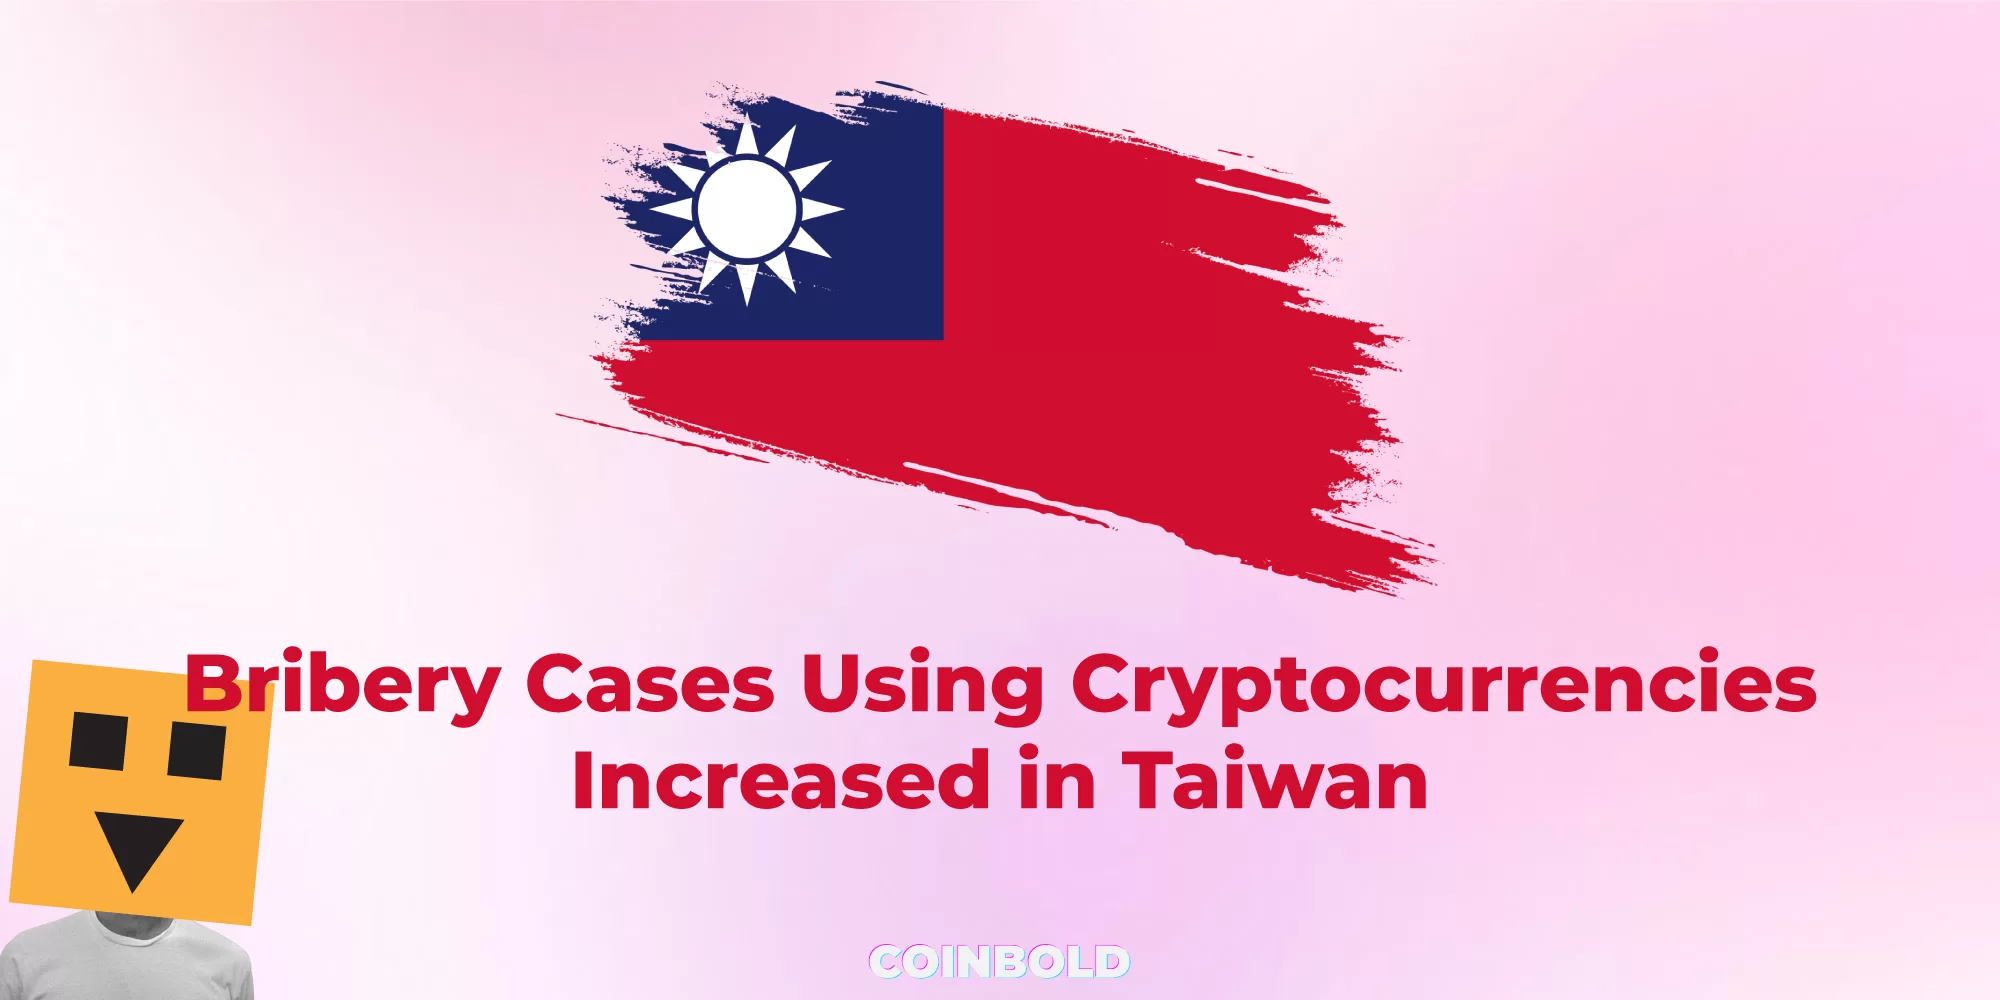 Bribery Cases Using Cryptocurrencies Increased in Taiwan